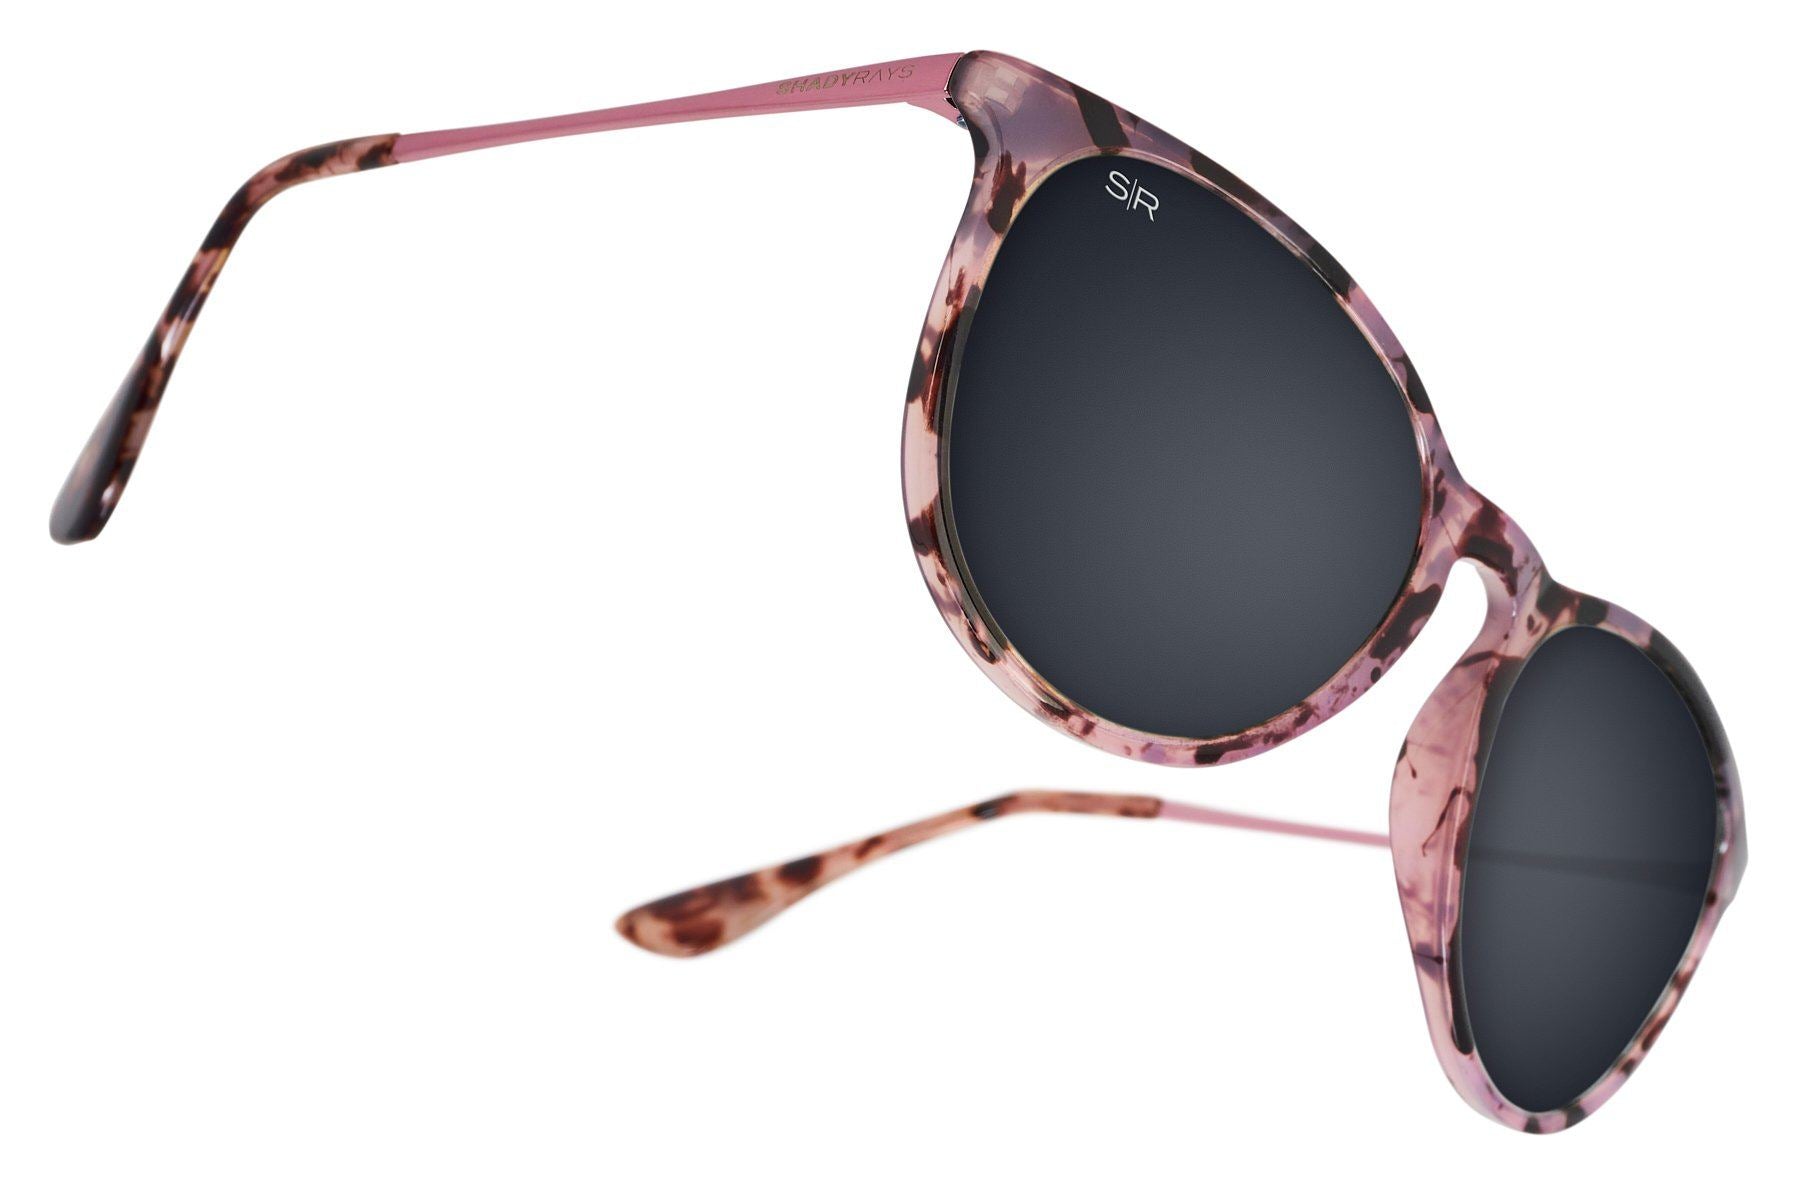 Allure - Midnight Pink Tortoise SR Pro Polarized Women's Sunglasses | Tortoise Women's Sunglasses | Christmas Gifts for Girlfriend | Gifts for Her 